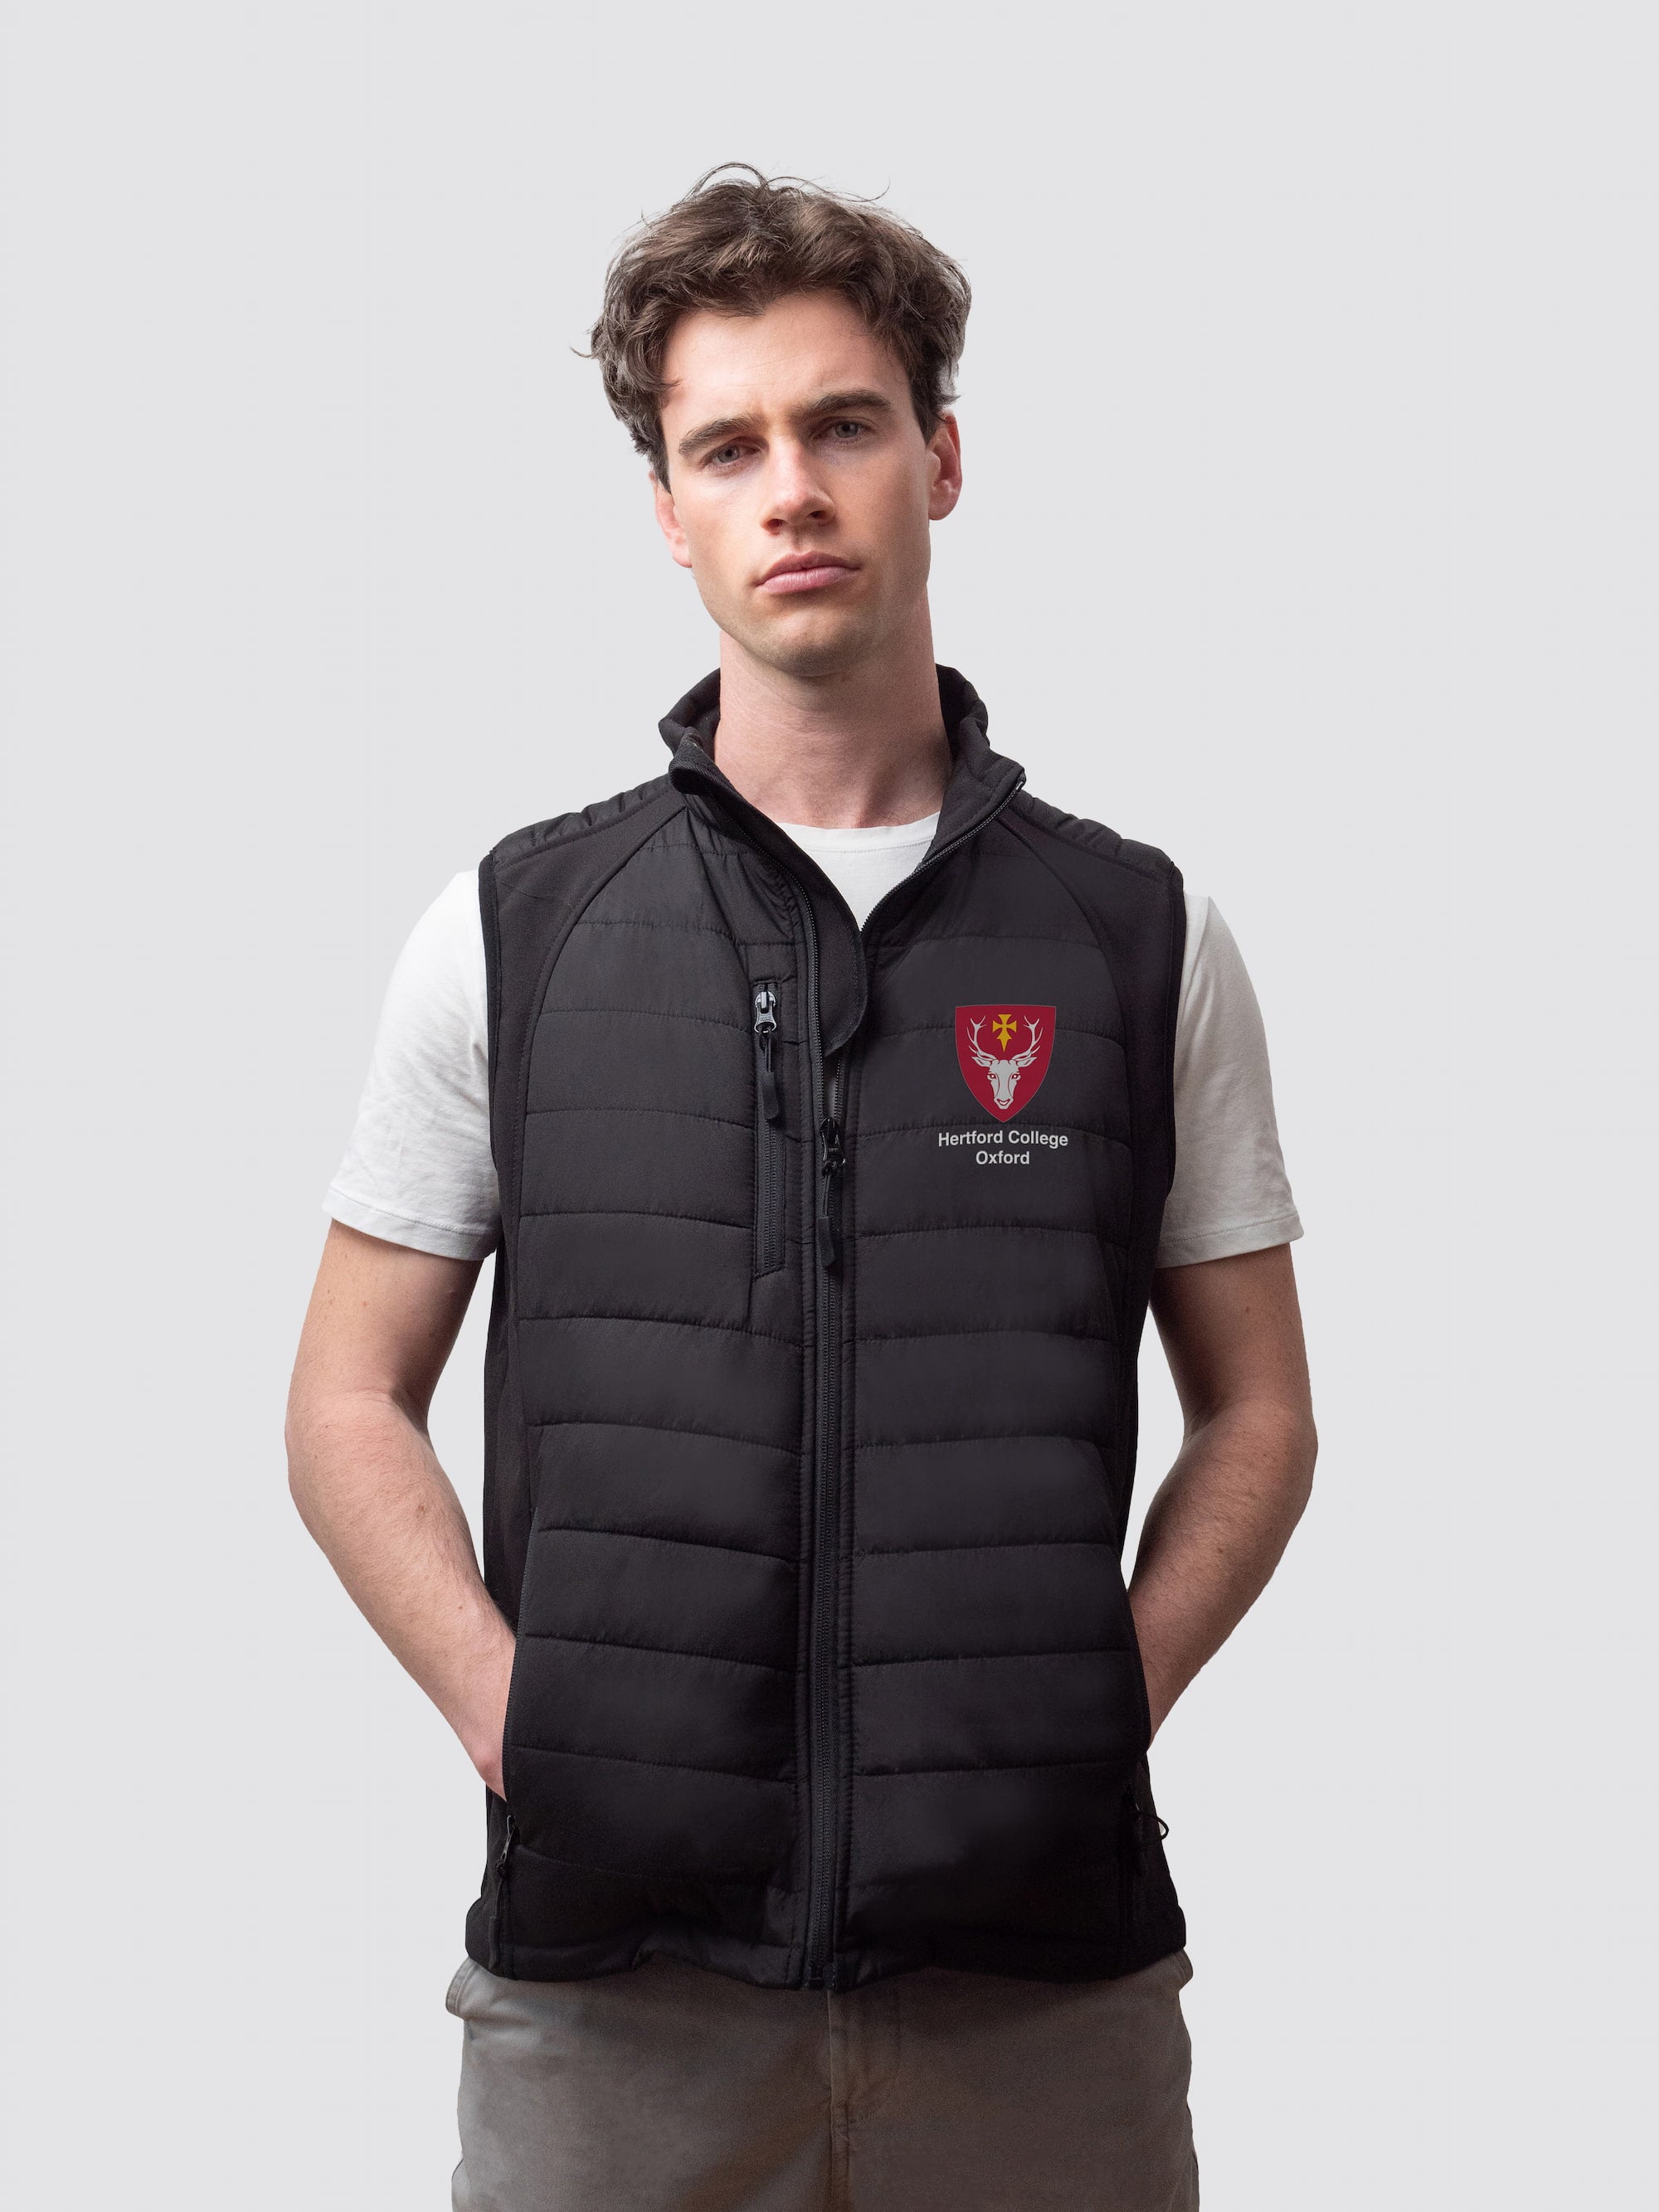 Oxford University gilet, made entirely from premium sustainable yarns